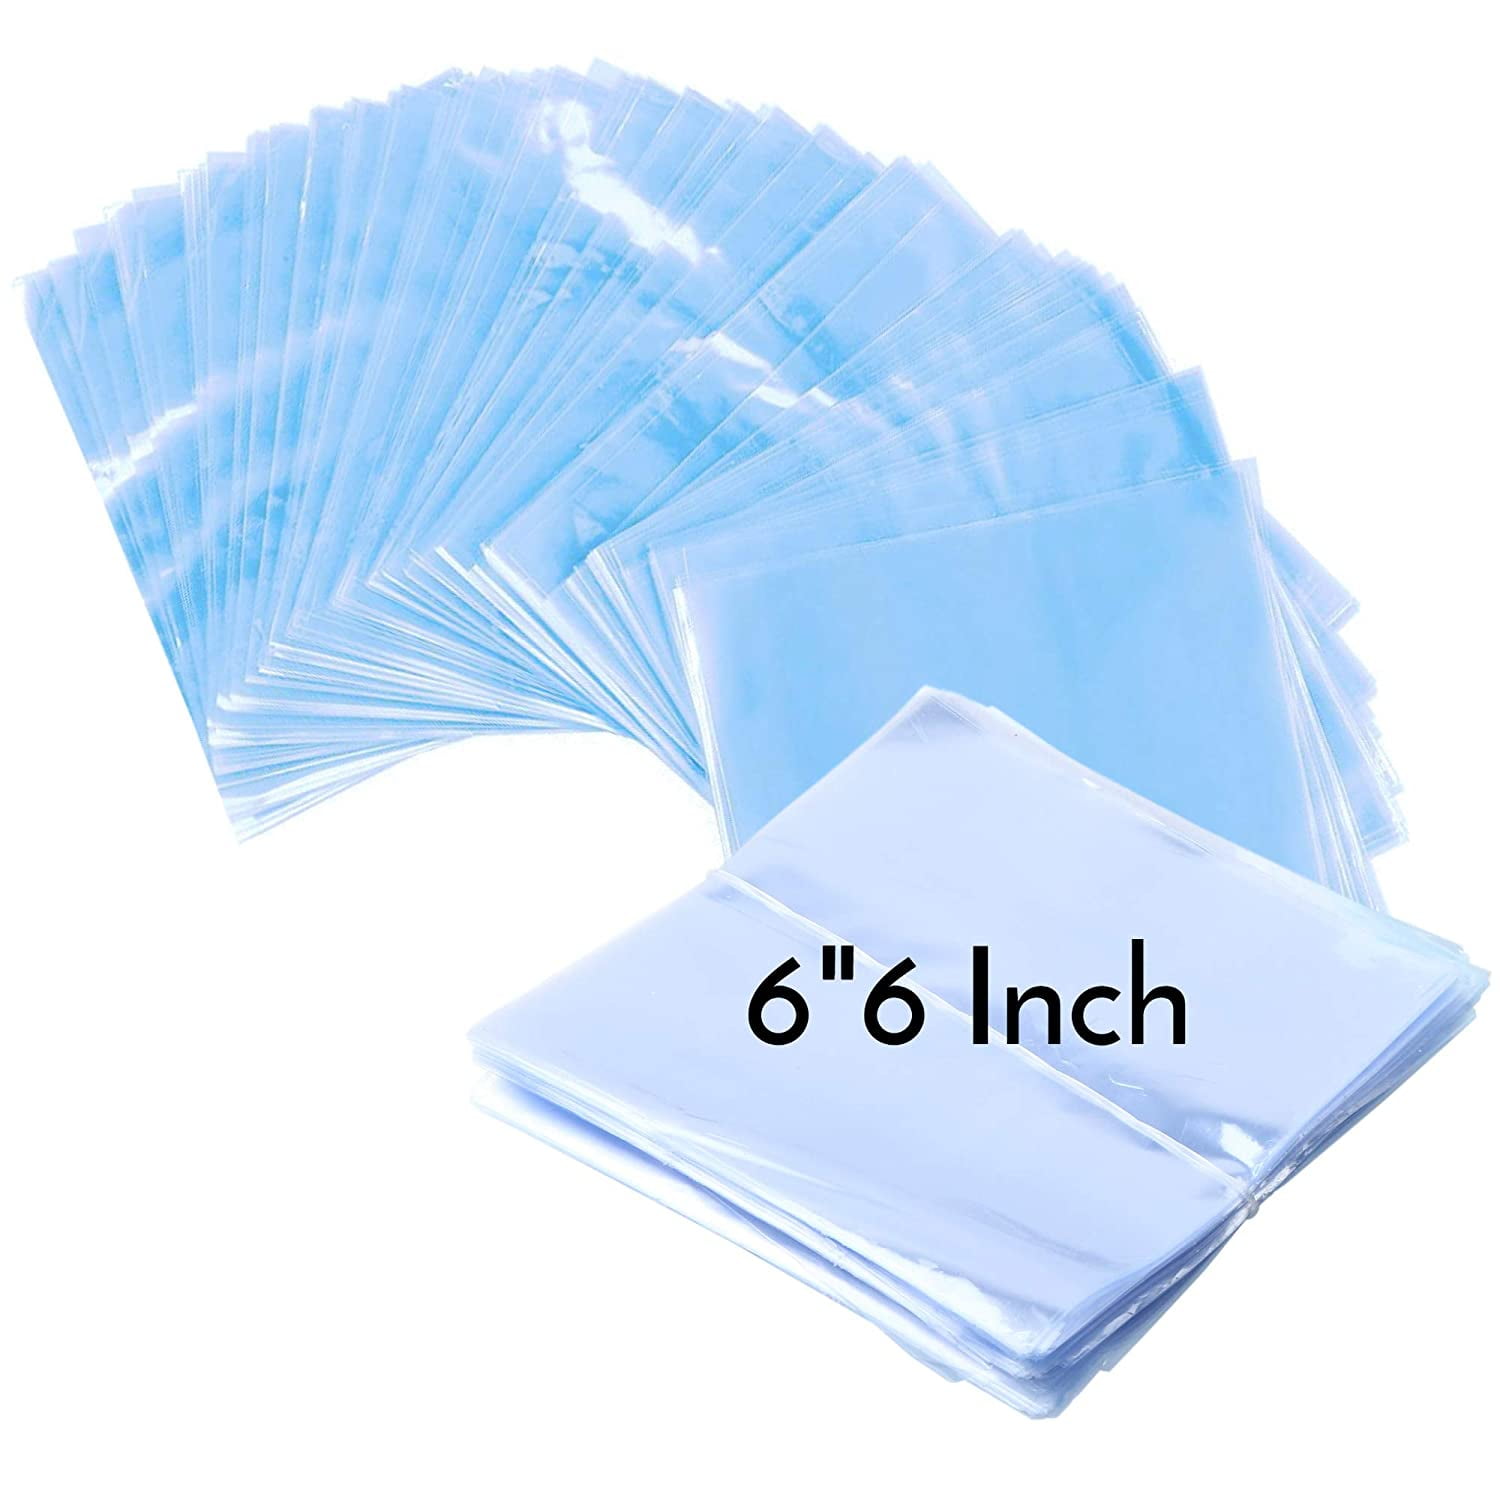 100 100 PCS Shrink Wrap Bags 12 in X 20 in Clear PVC Heat Seal Shrink Bags for Gifts Packaging Collection Wrapping Stationery Shoe Photo Frames Soap Making Supplies Homemade DIY Craft for Sale 